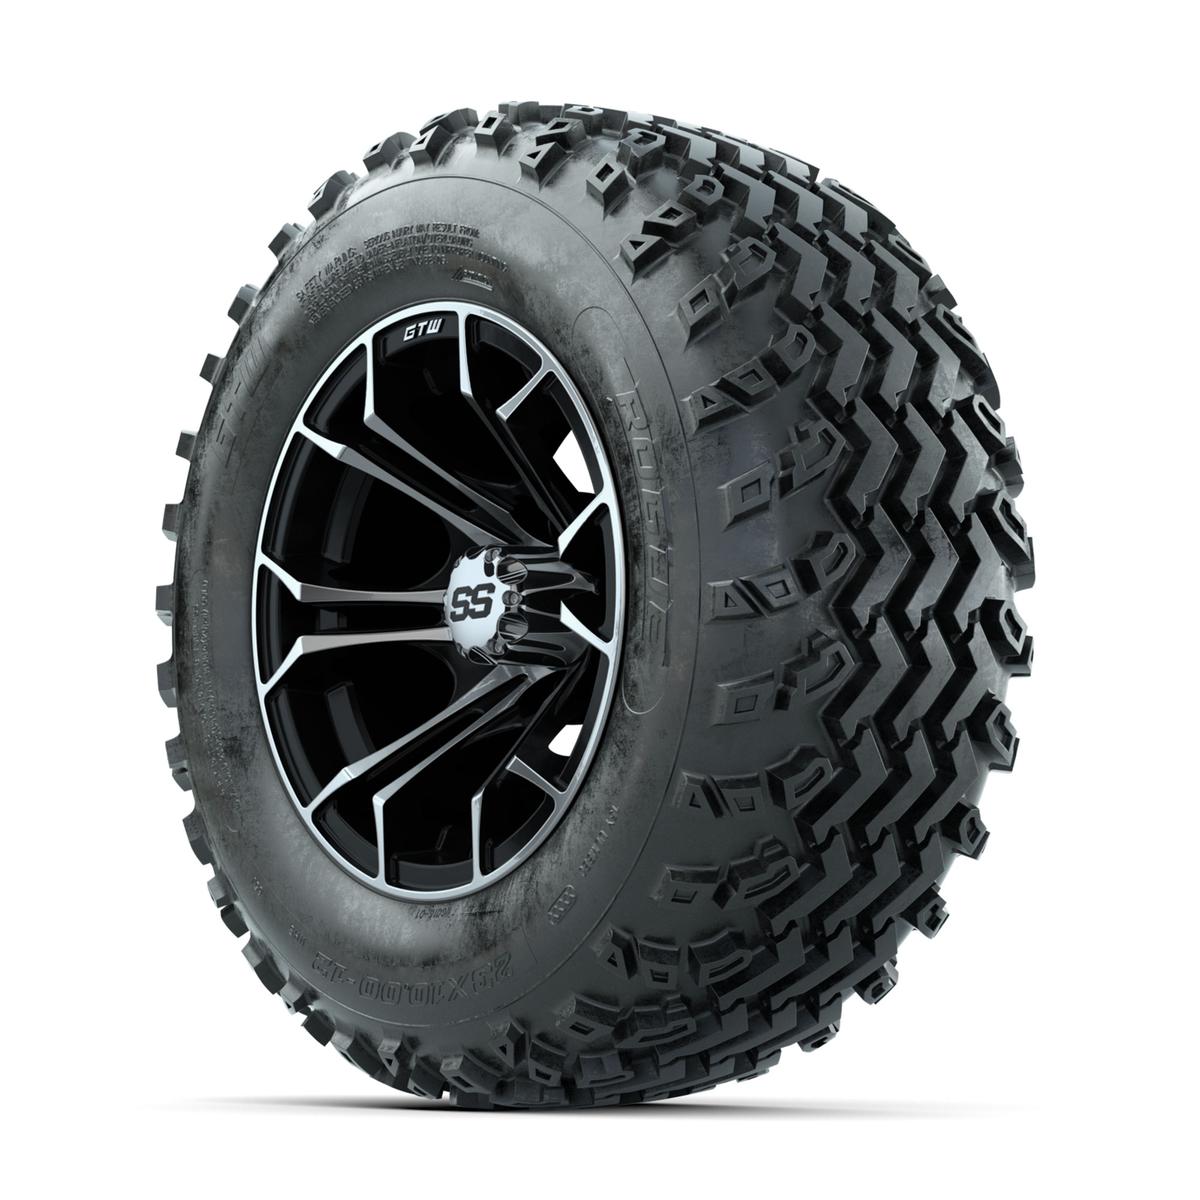 GTW Spyder Machined/Black 12 in Wheels with 23x10.00-12 Rogue All Terrain Tires – Full Set